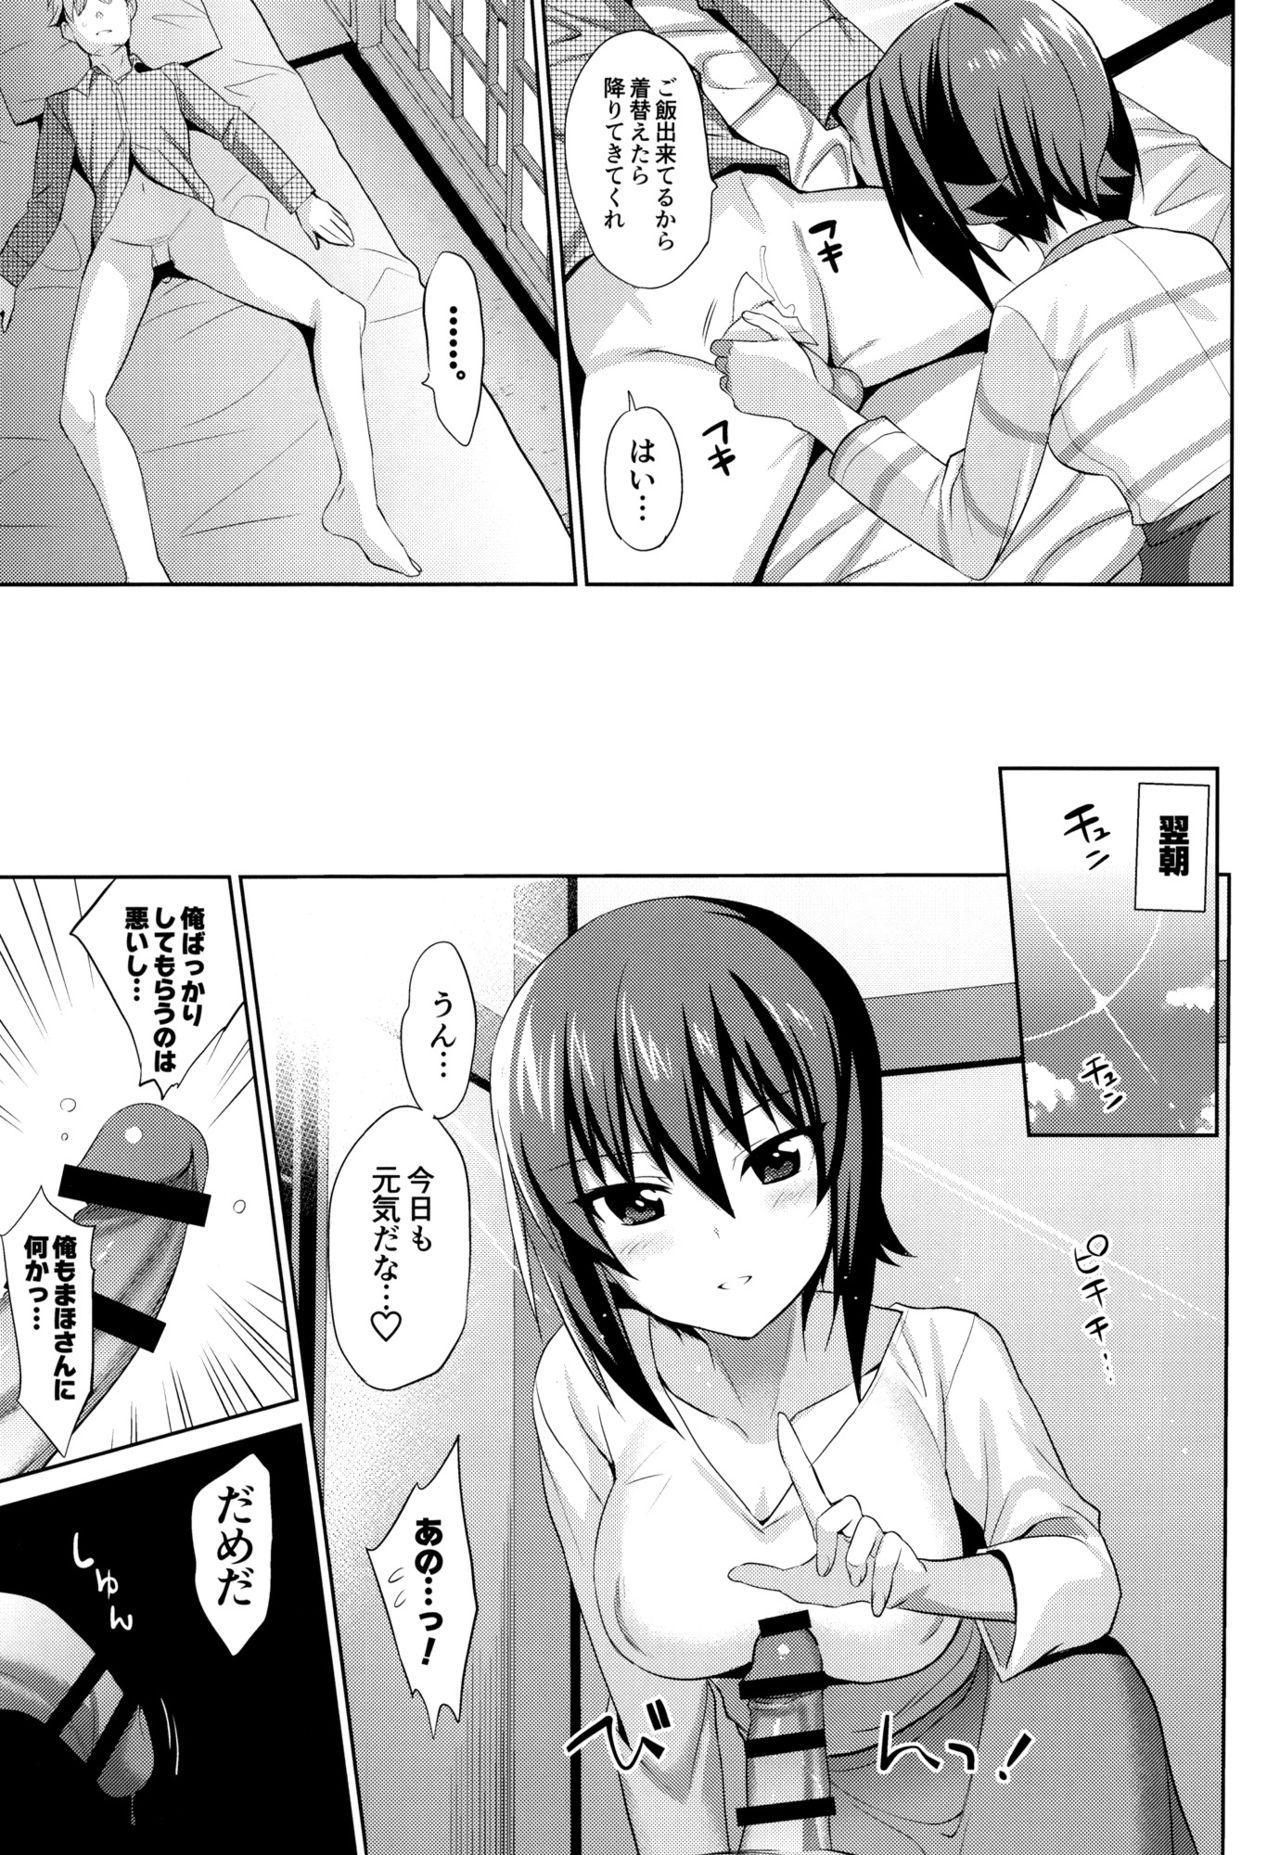 Women Sucking Dick LET ME LOVE YOU TOO - Girls und panzer Lesbians - Page 10